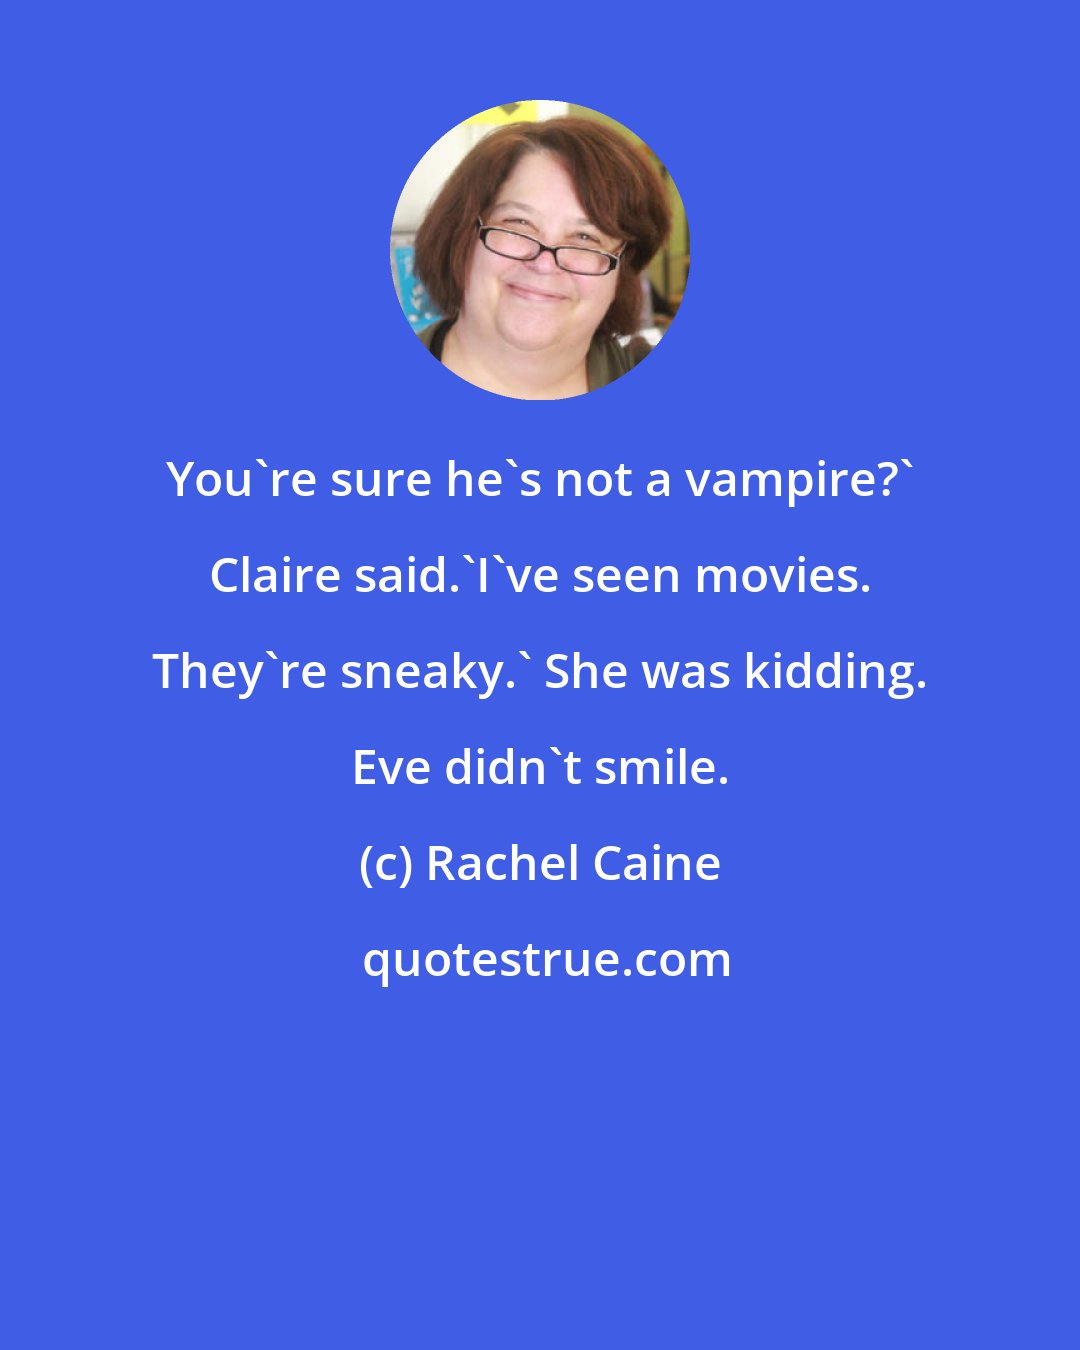 Rachel Caine: You're sure he's not a vampire?' Claire said.'I've seen movies. They're sneaky.' She was kidding. Eve didn't smile.